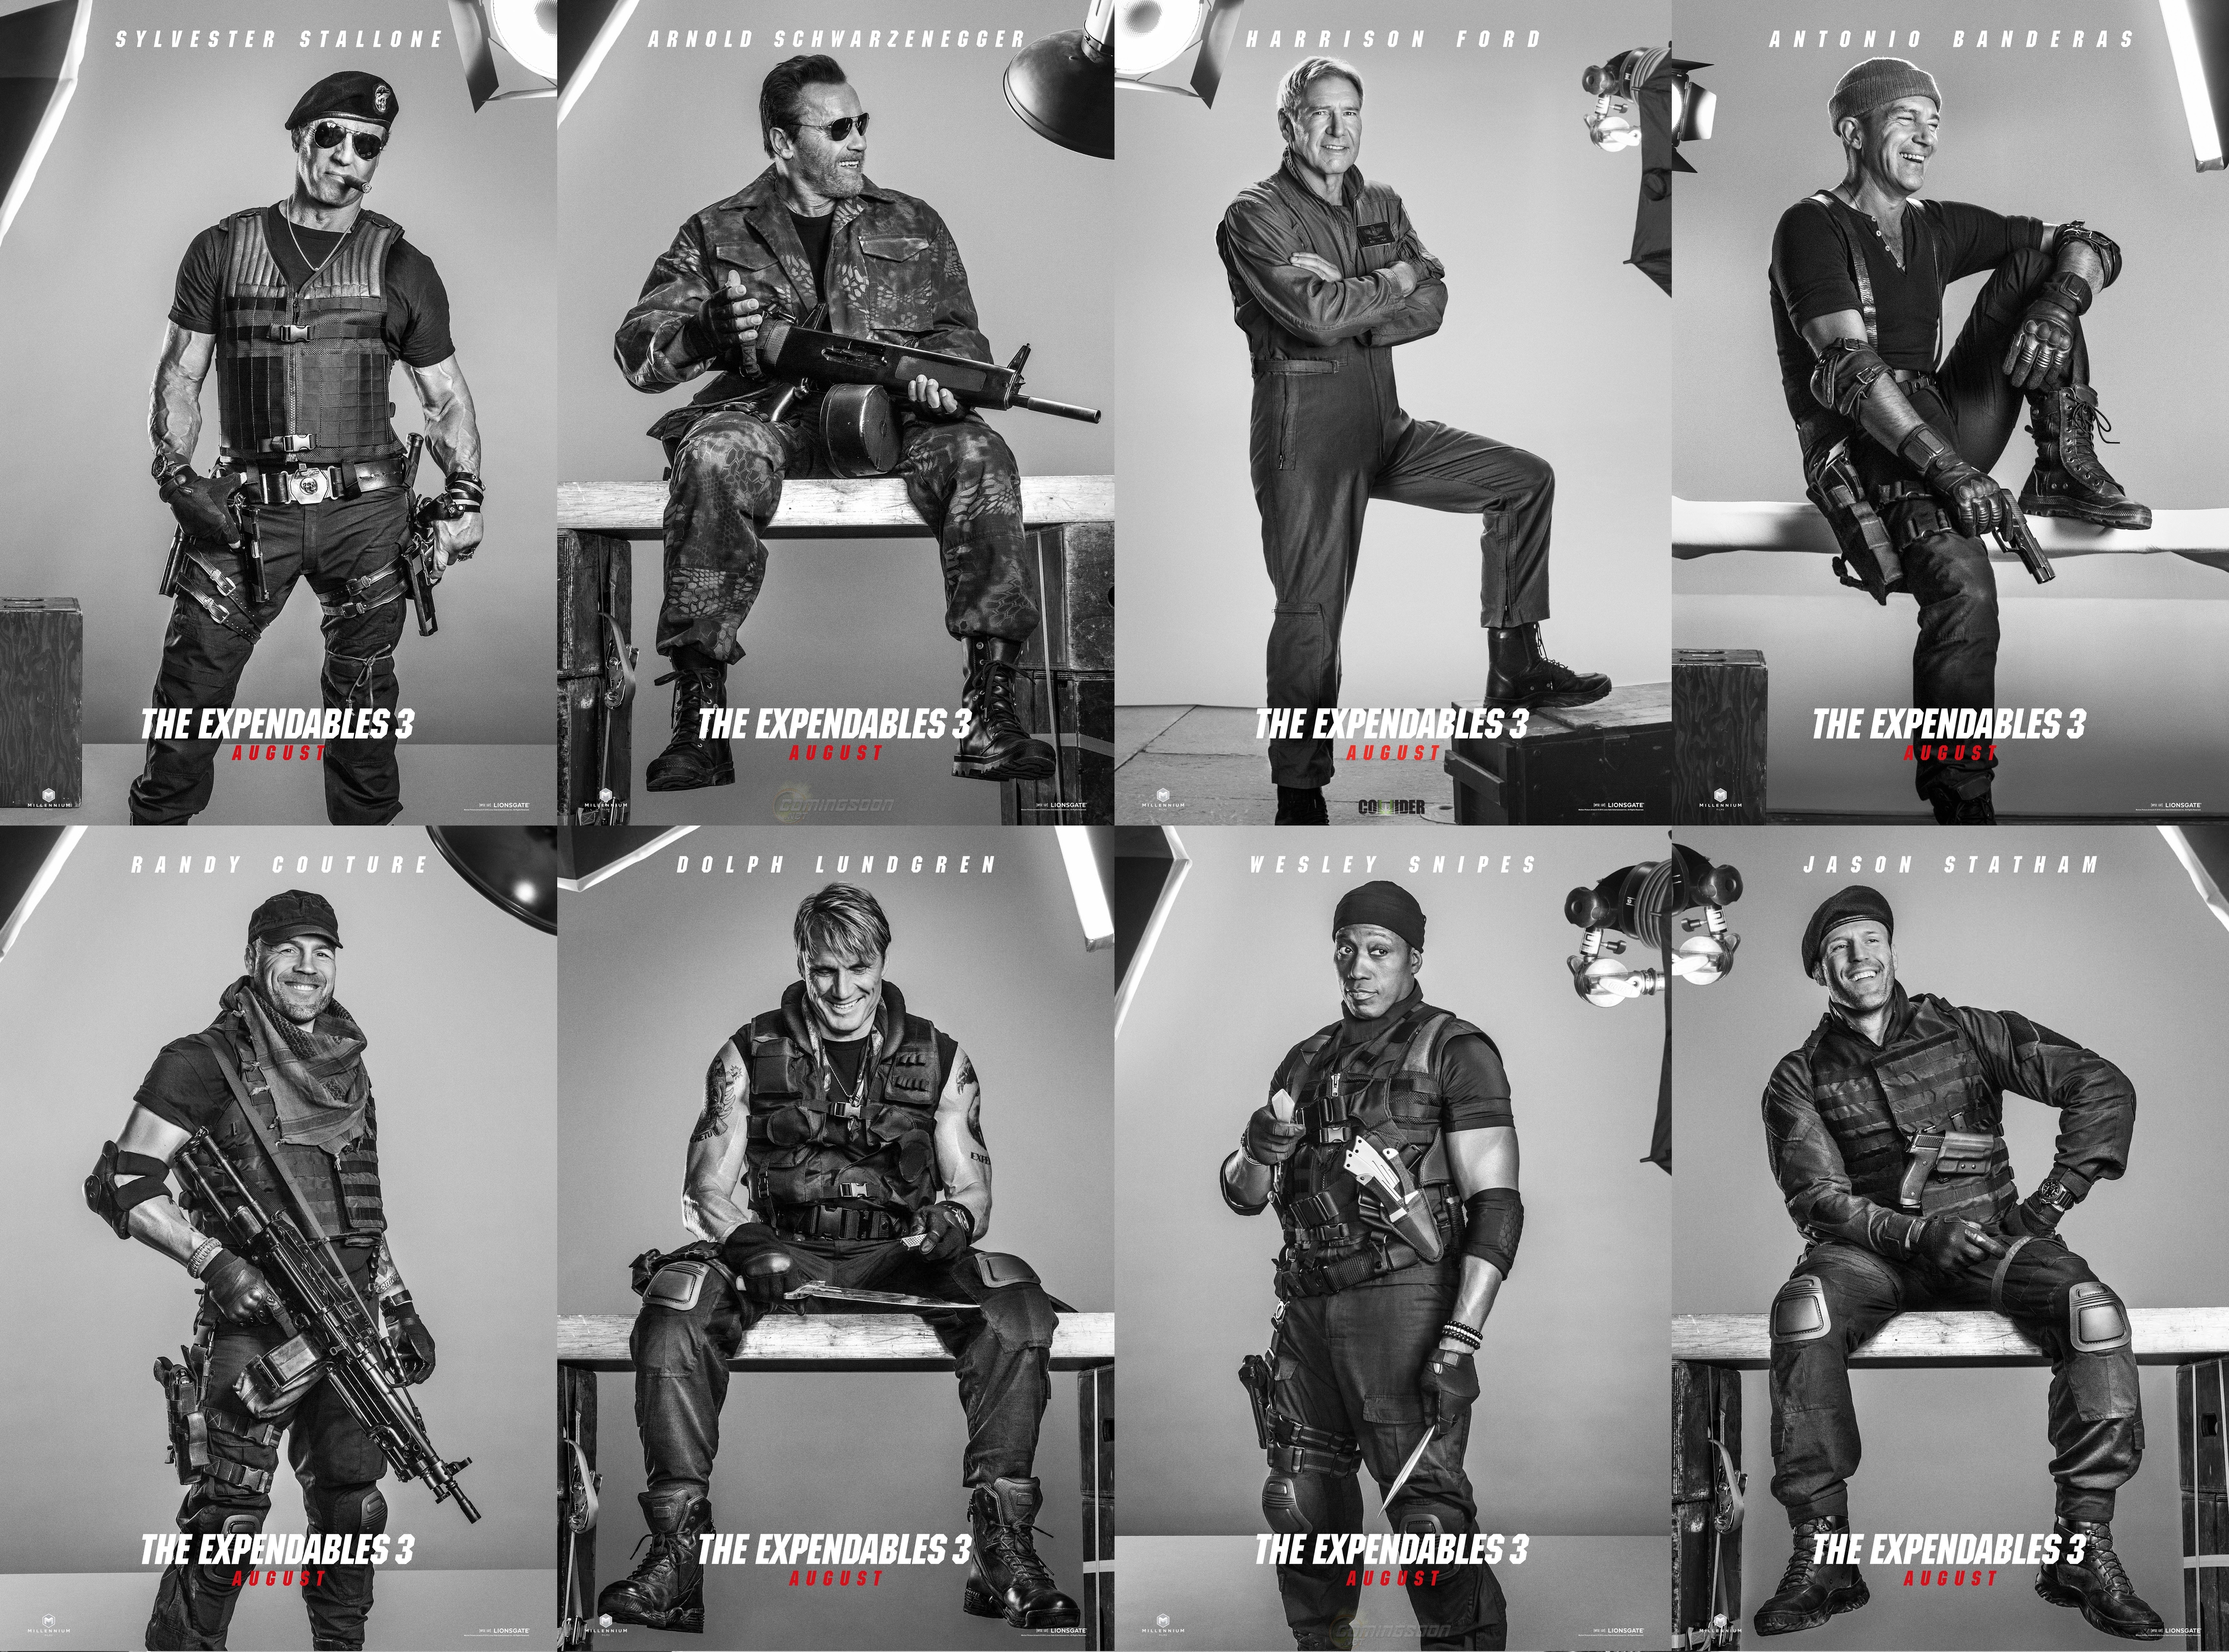 harrison ford, wesley snipes, movie, the expendables 3, antonio banderas, arnold schwarzenegger, barney ross, doc (the expendables), dolph lundgren, galgo (the expendables), gunnar jensen, jason statham, lee christmas, max drummer, randy couture, sylvester stallone, toll road, trench (the expendables), the expendables 4K Ultra